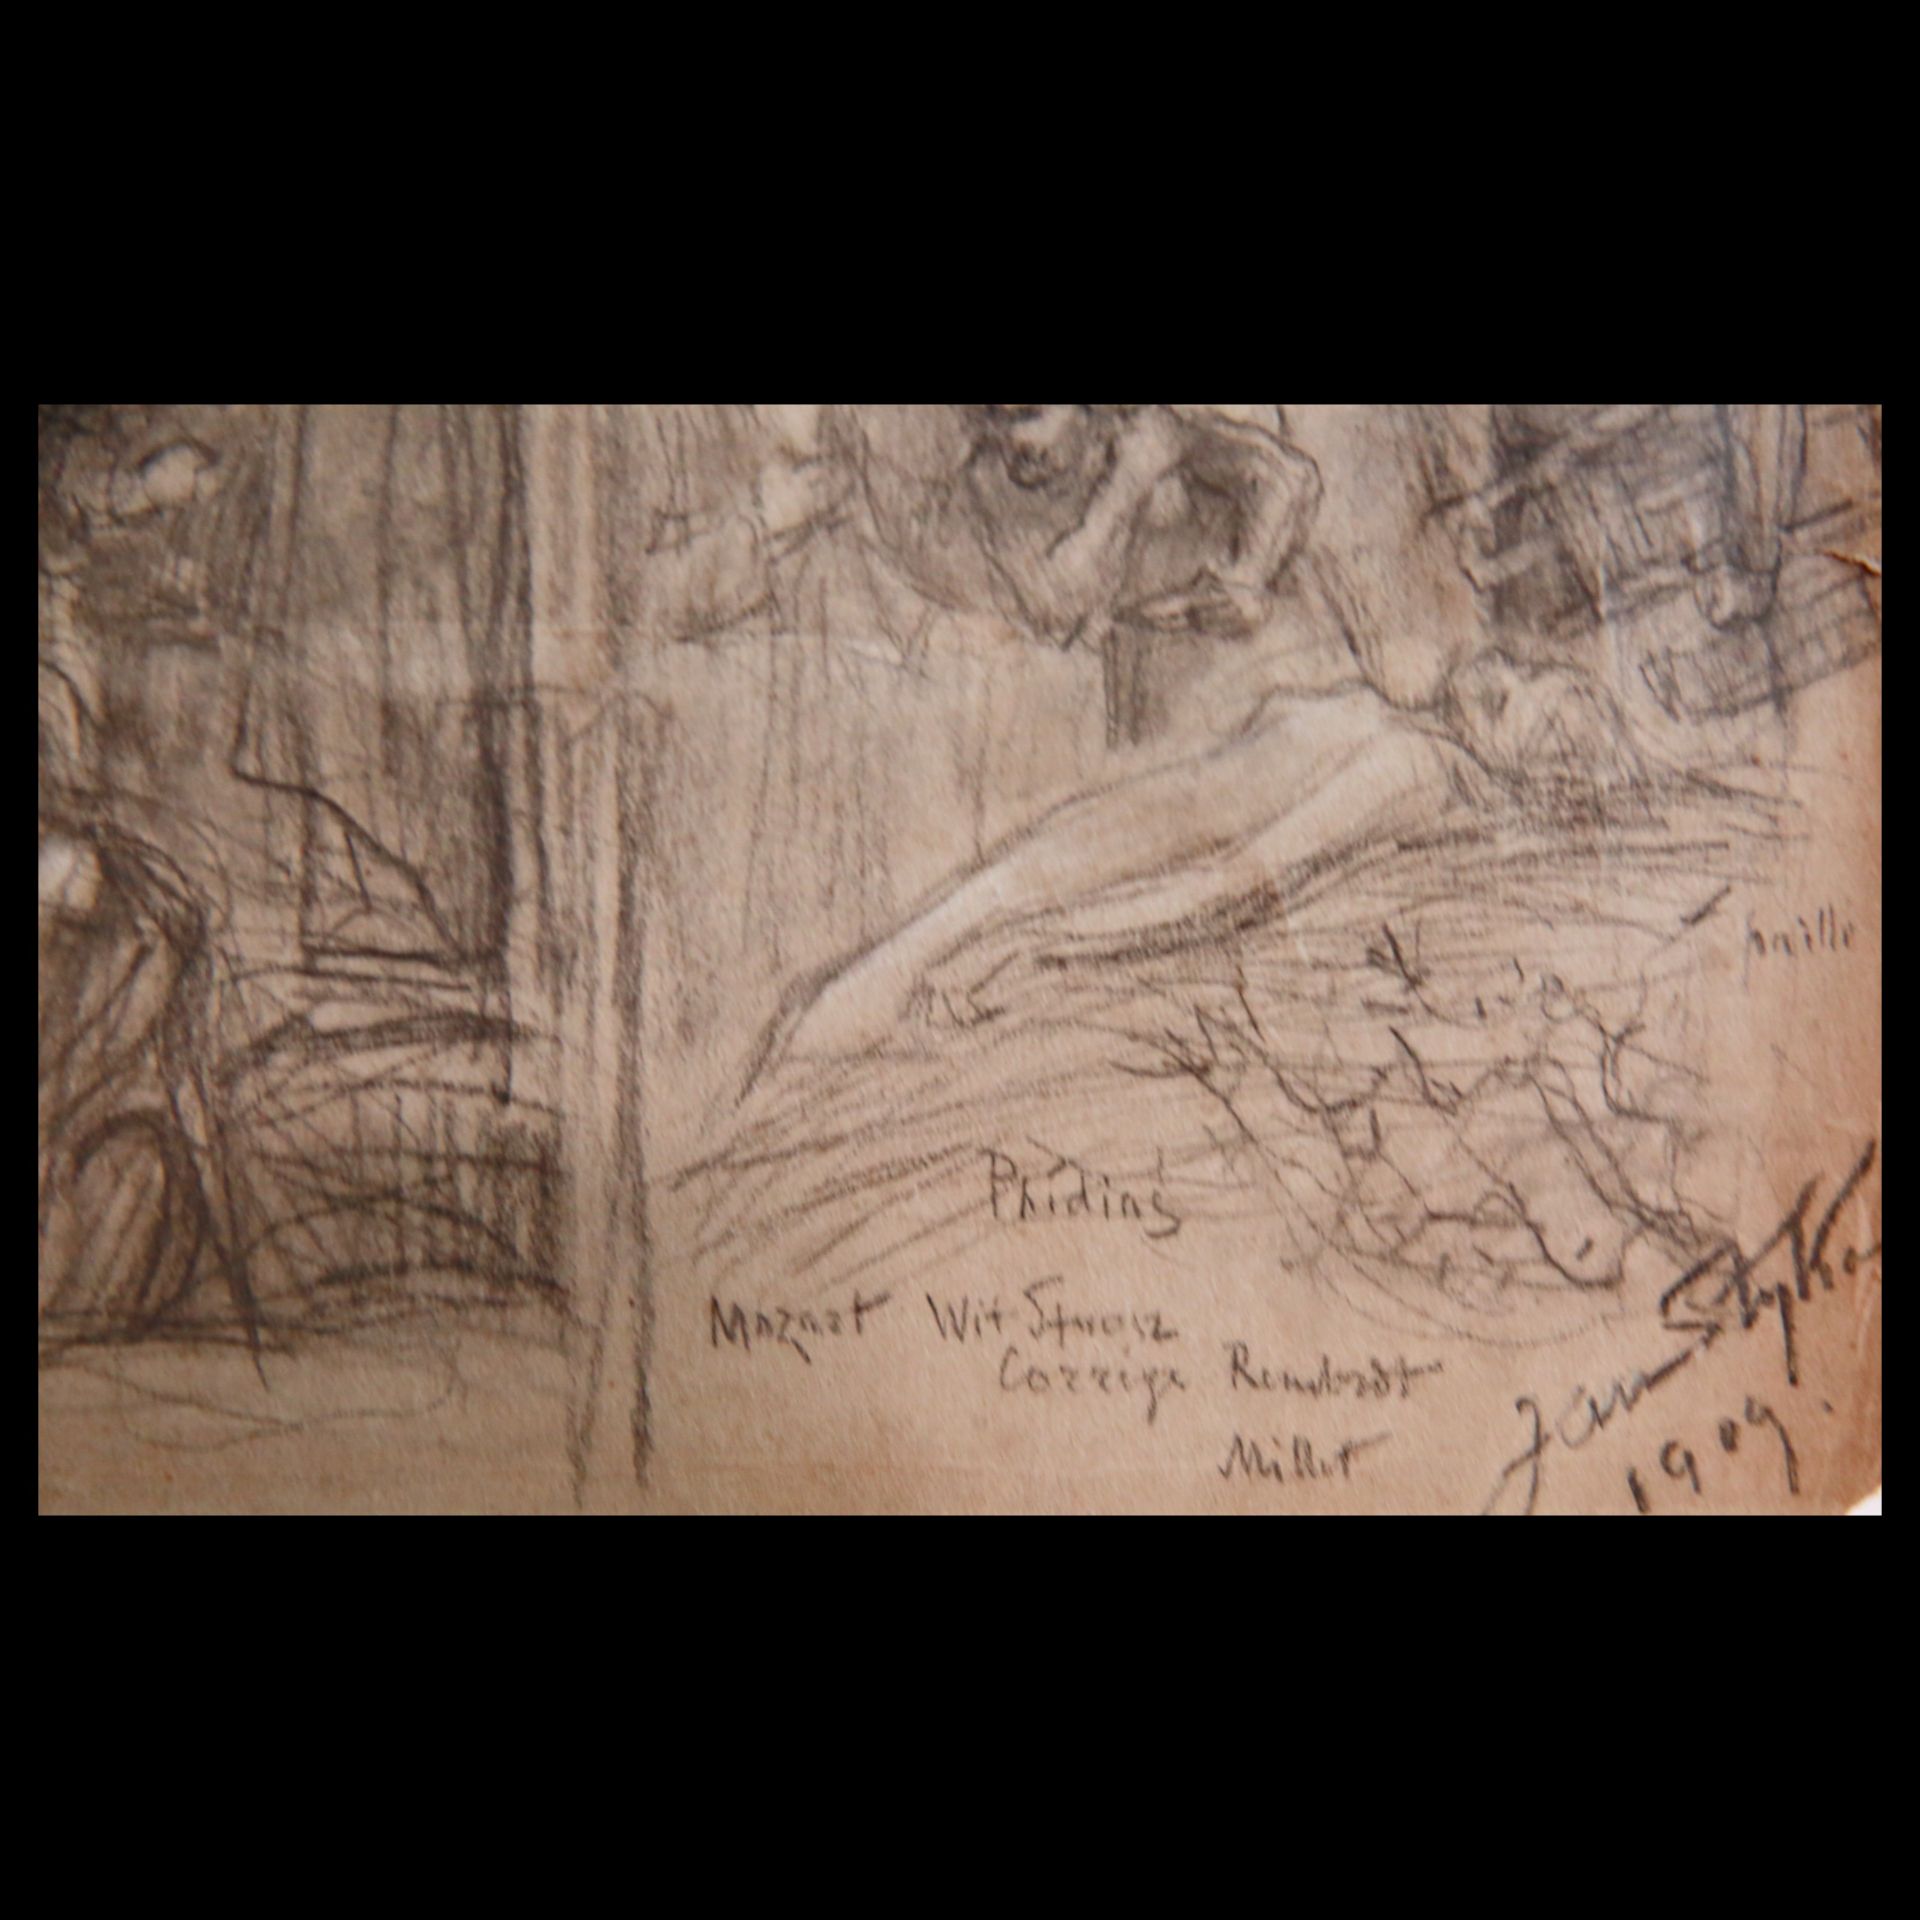 Jan STYKA (1858-1925) drawing on a biblical theme, Pencil on paper, author signature,1909. - Image 4 of 7